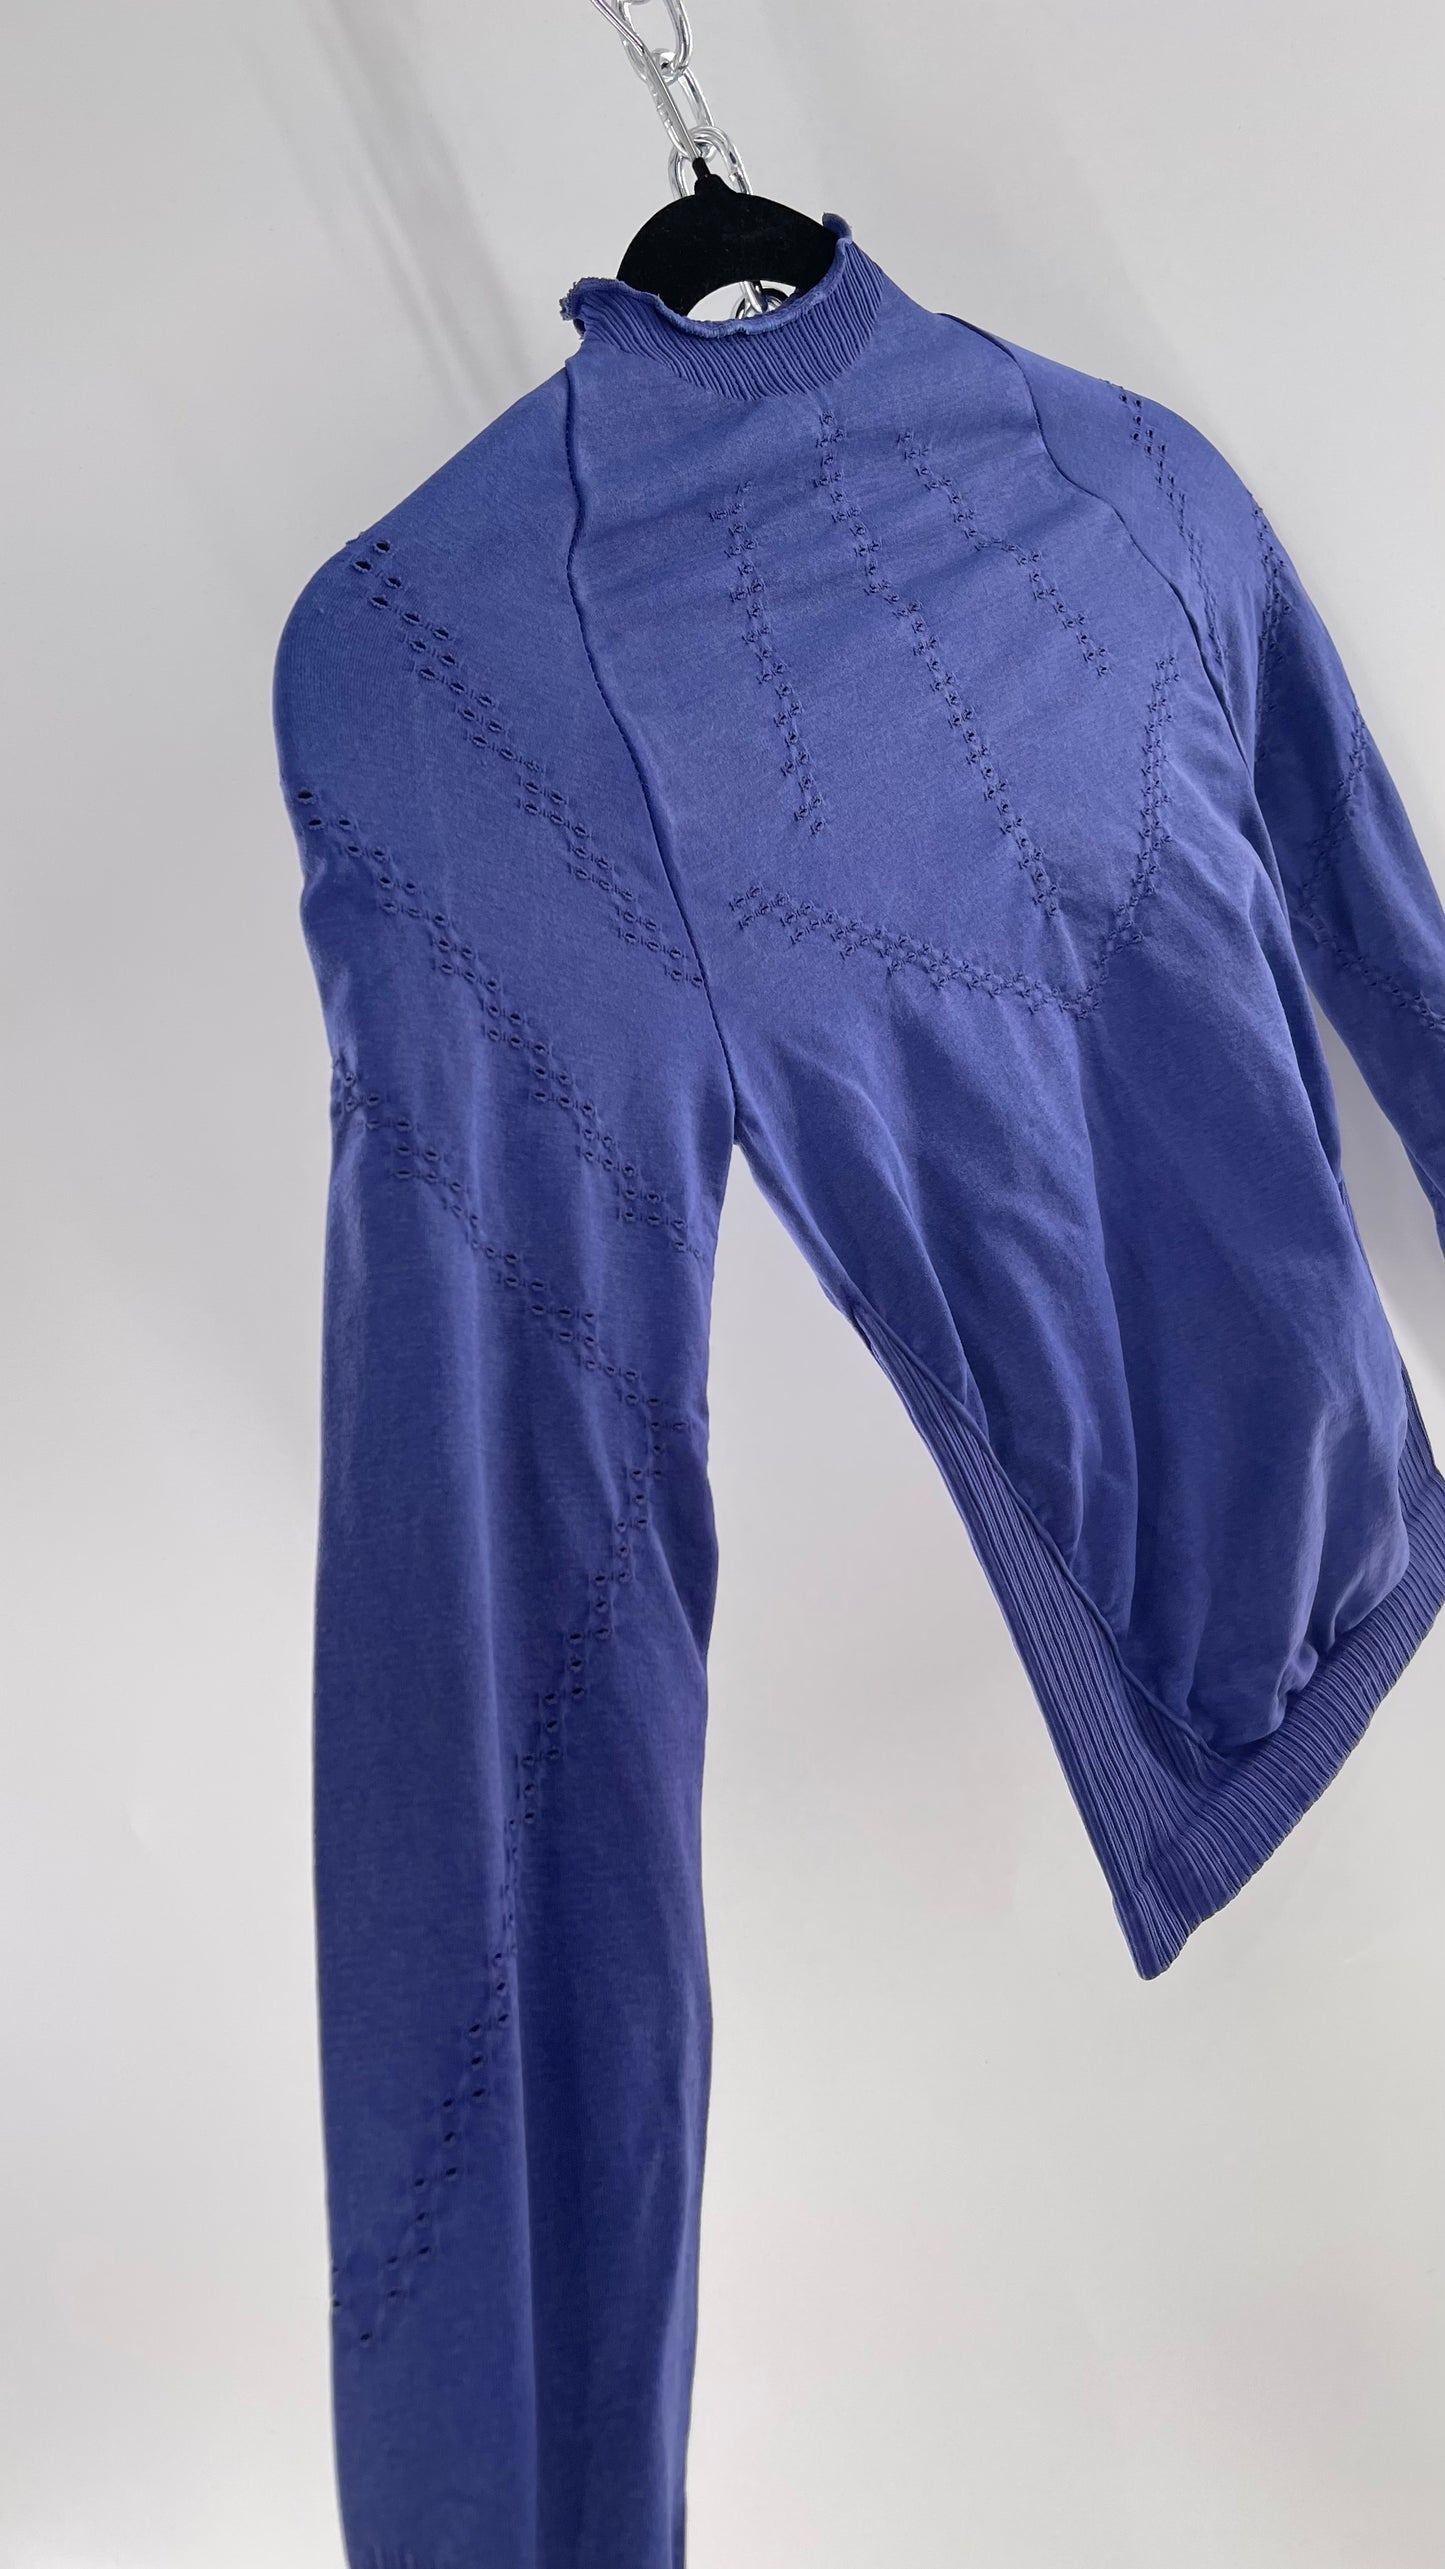 Free People Movement Spandex Perforated Purple Skim Top (XS/S)